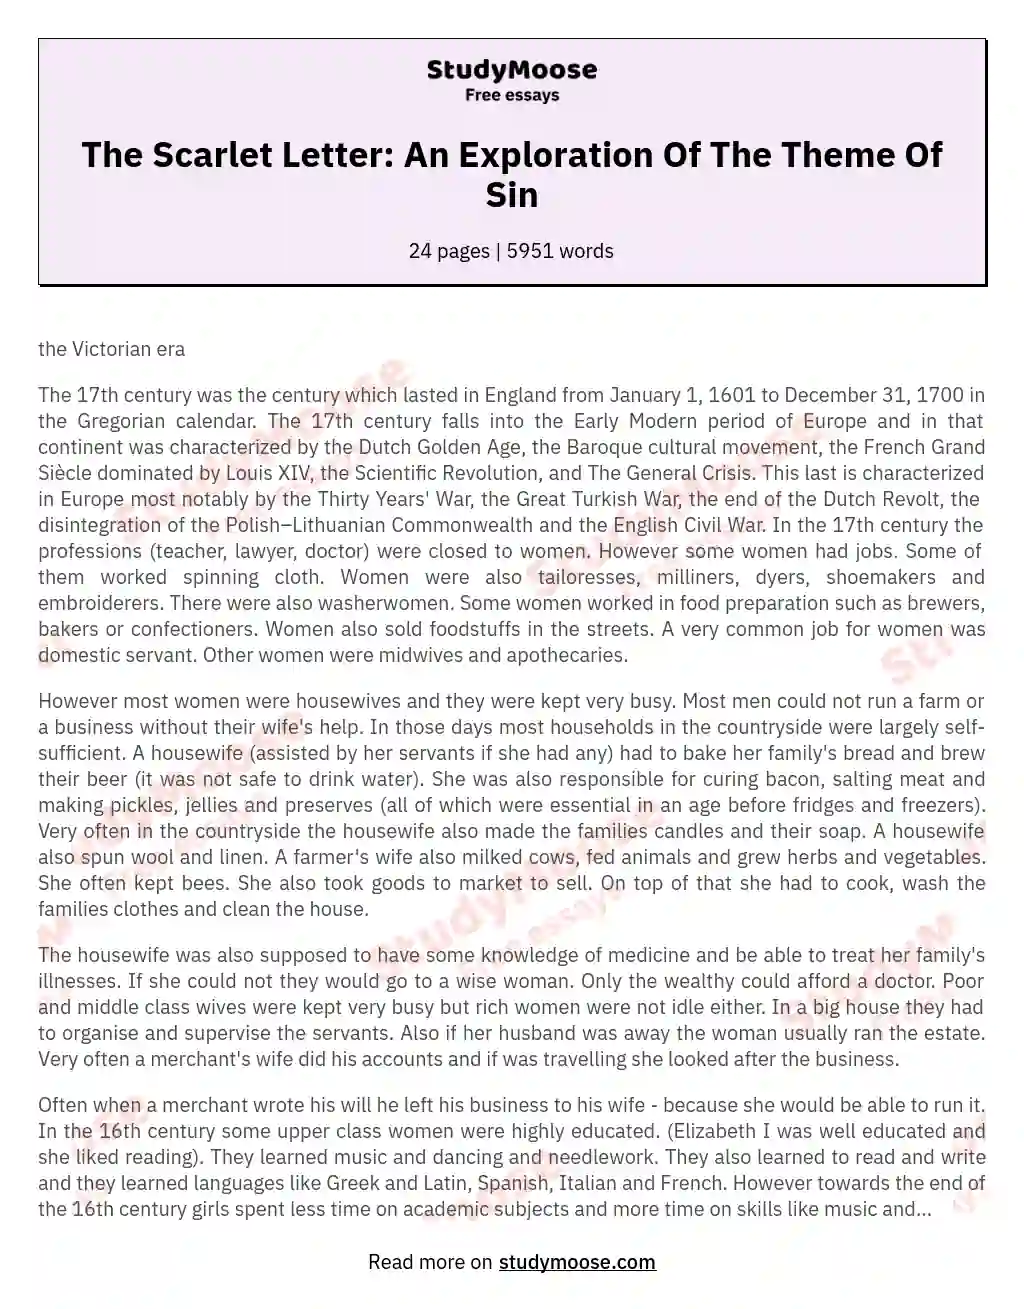 The Scarlet Letter: An Exploration Of The Theme Of Sin essay